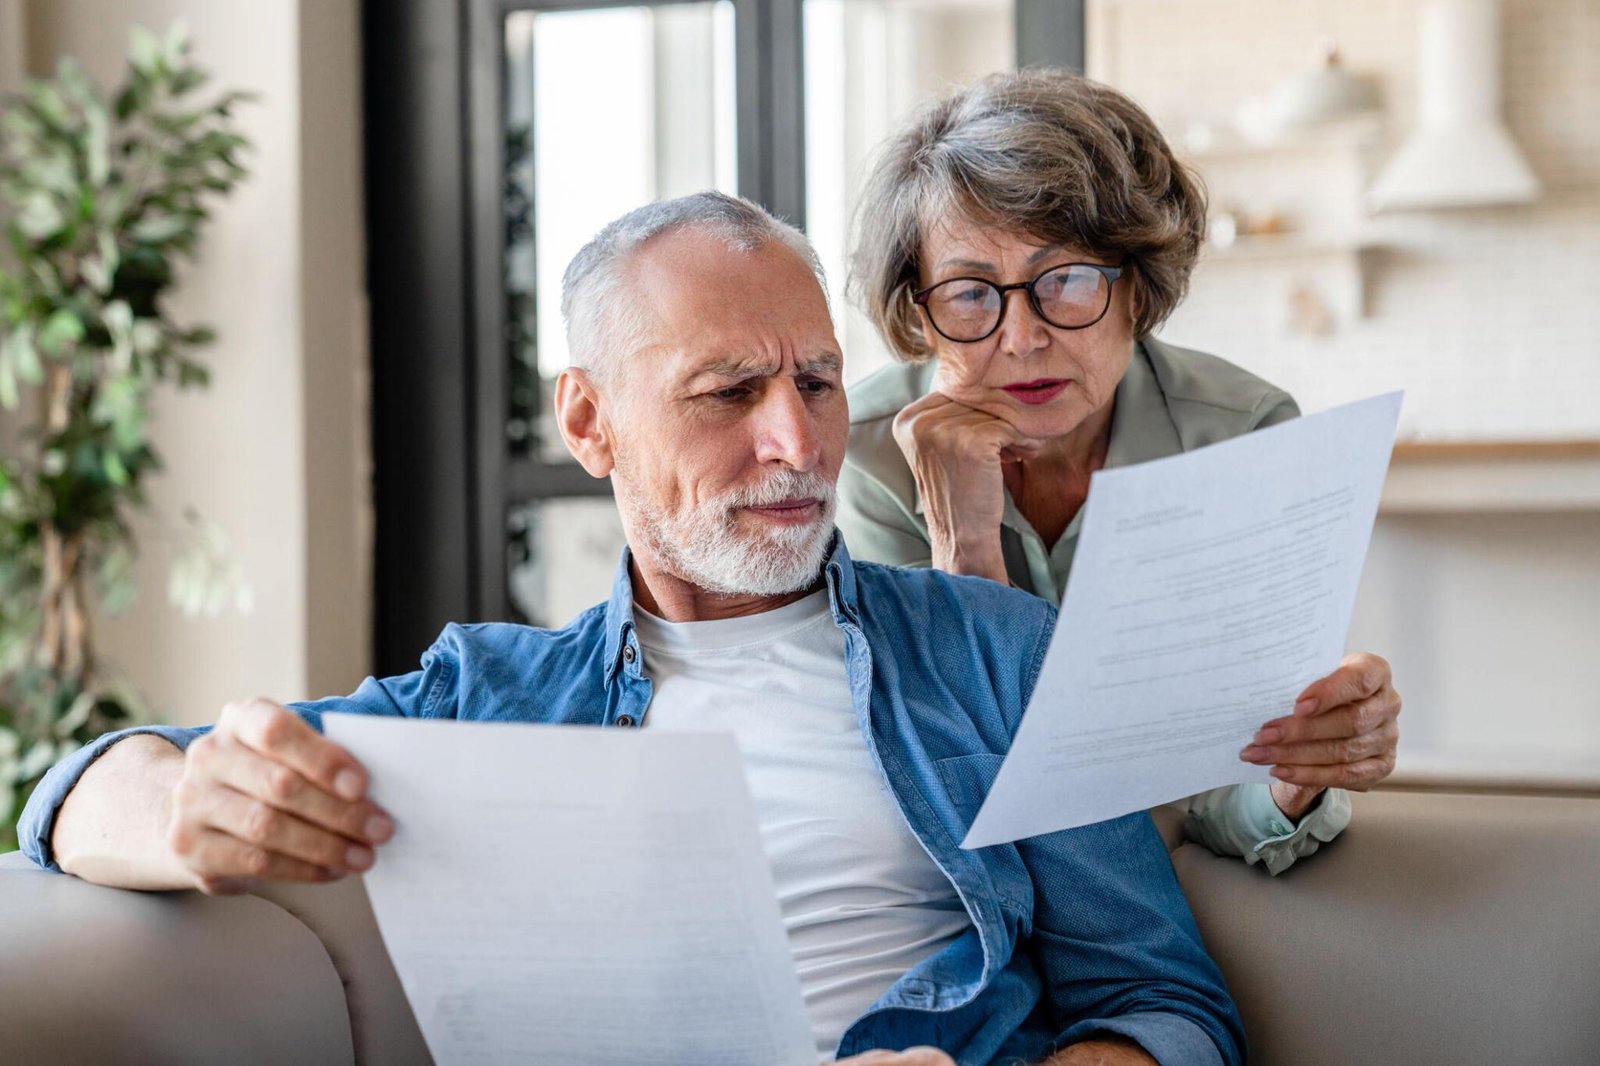 Estate Planning: Why It’s Important and How to Get Started